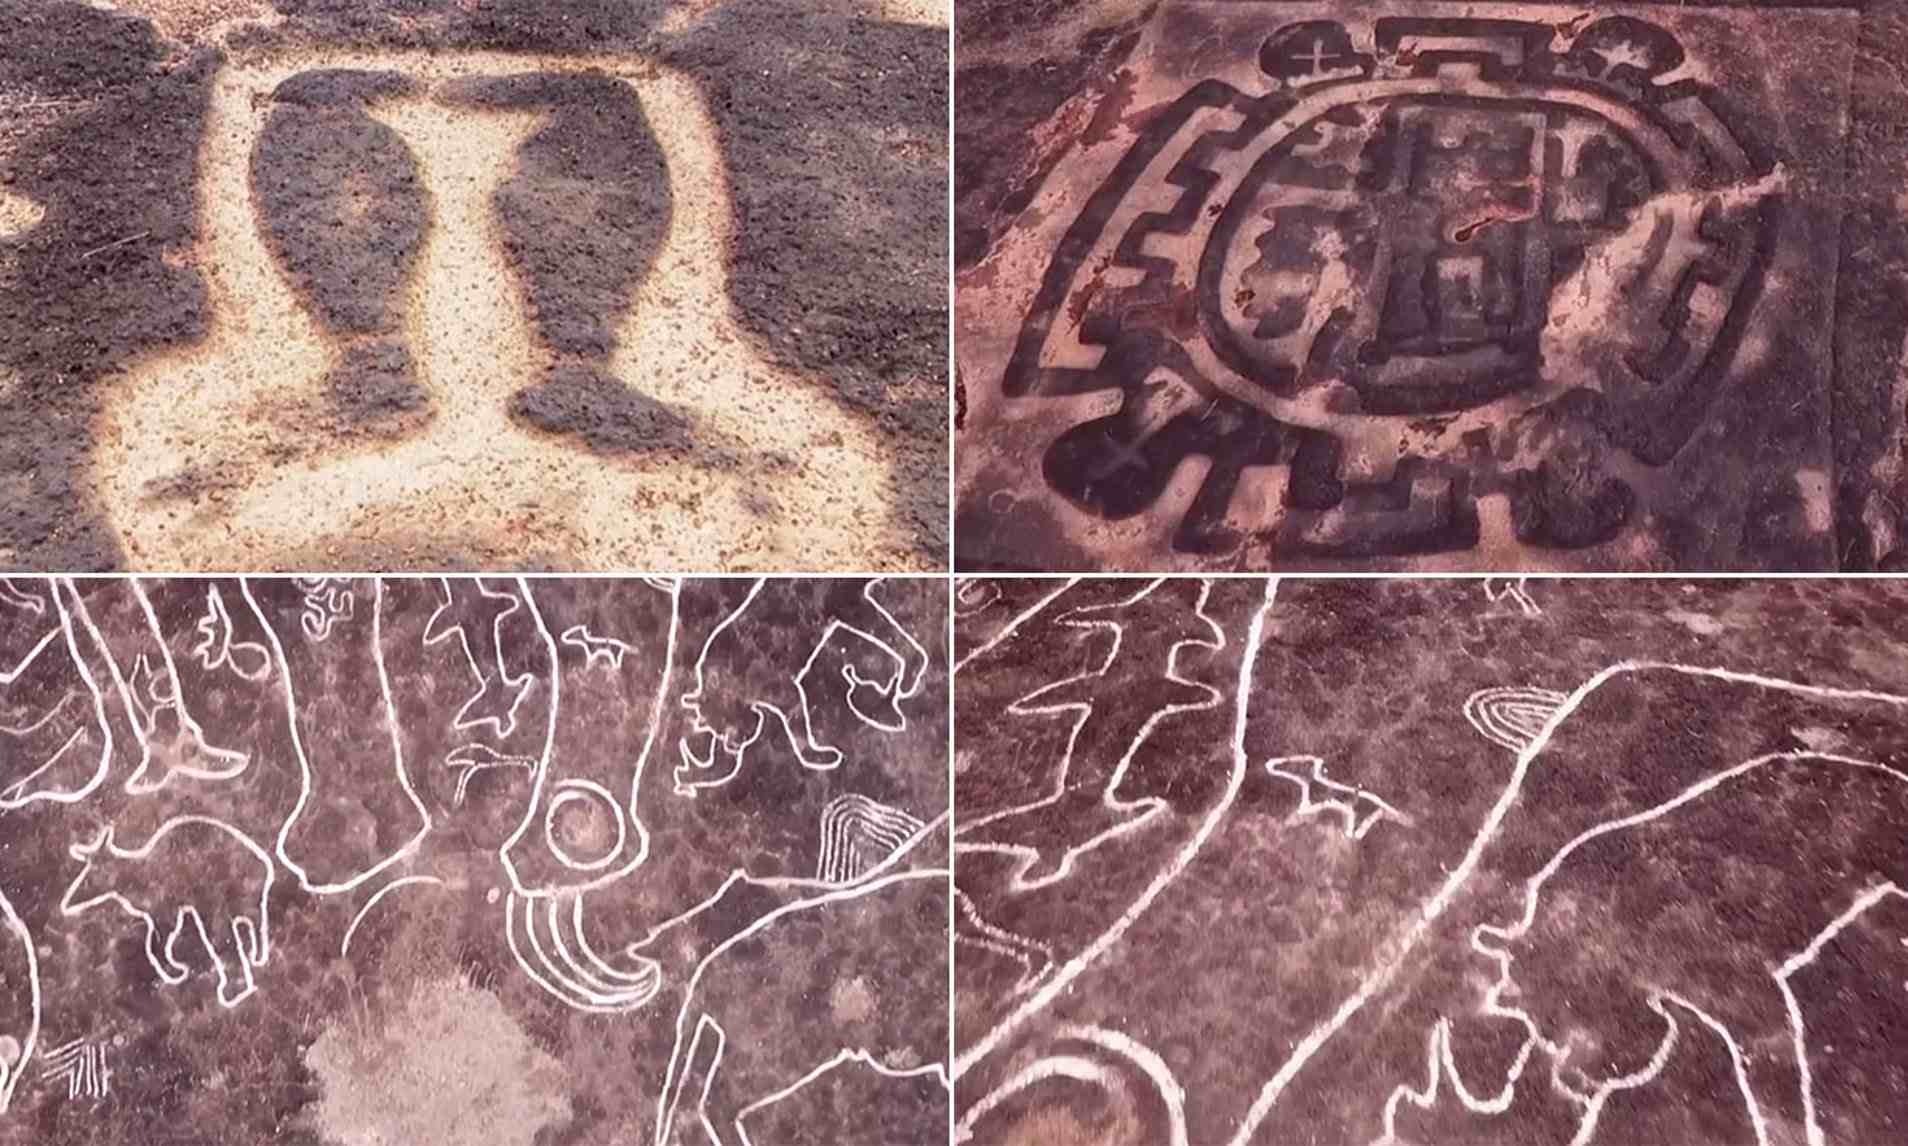 An Unknown Ancient Civilization in India Carved This Rock Art